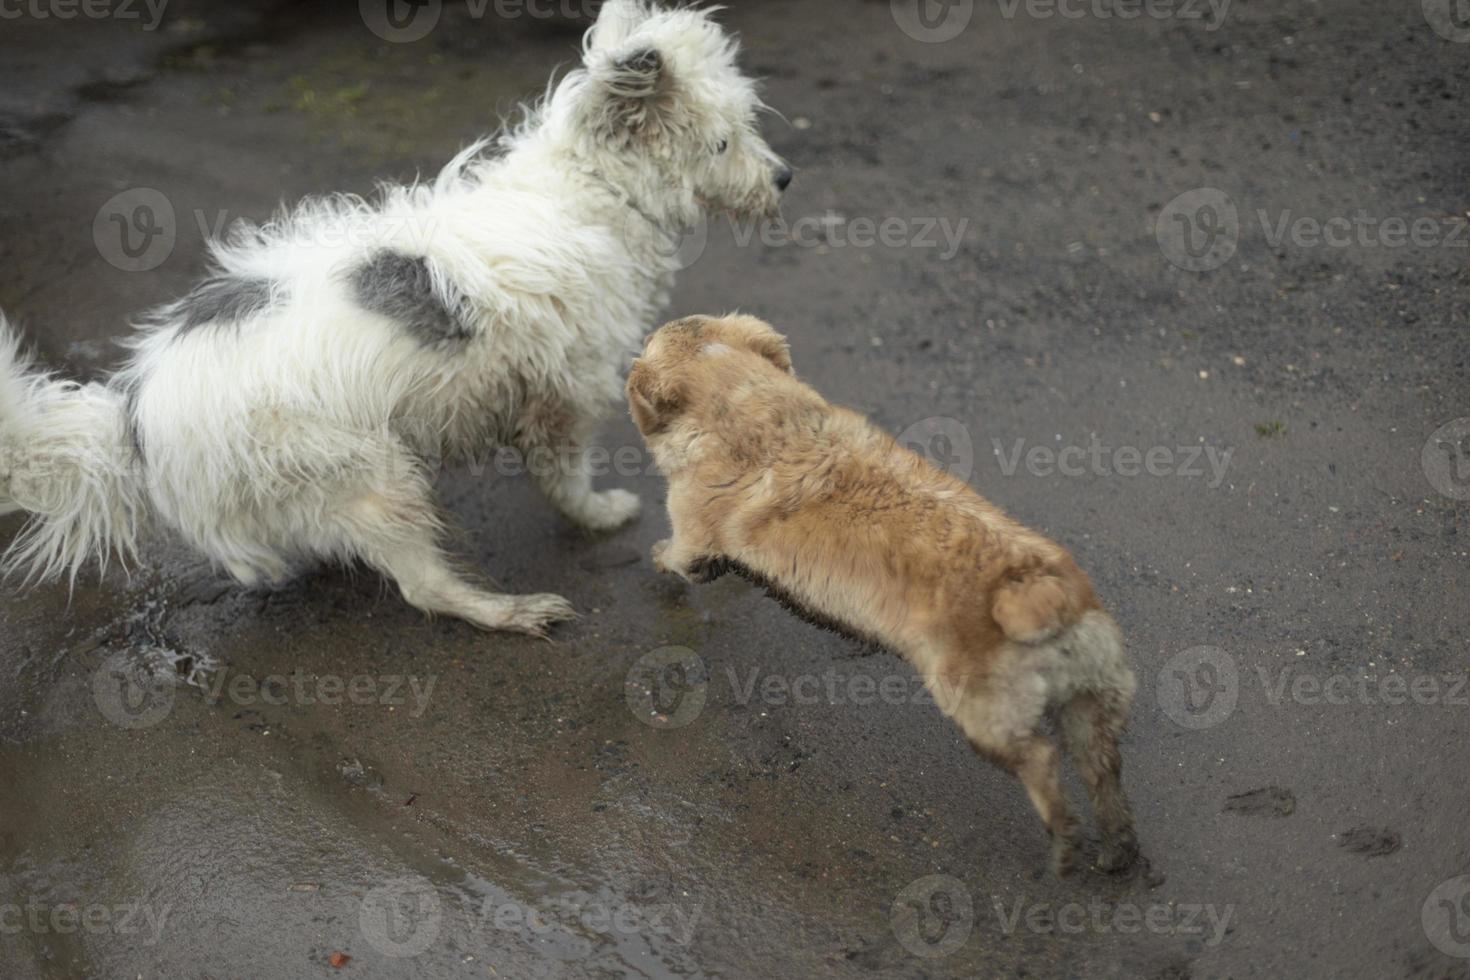 Dogs of different sizes. Dogs play on street. photo